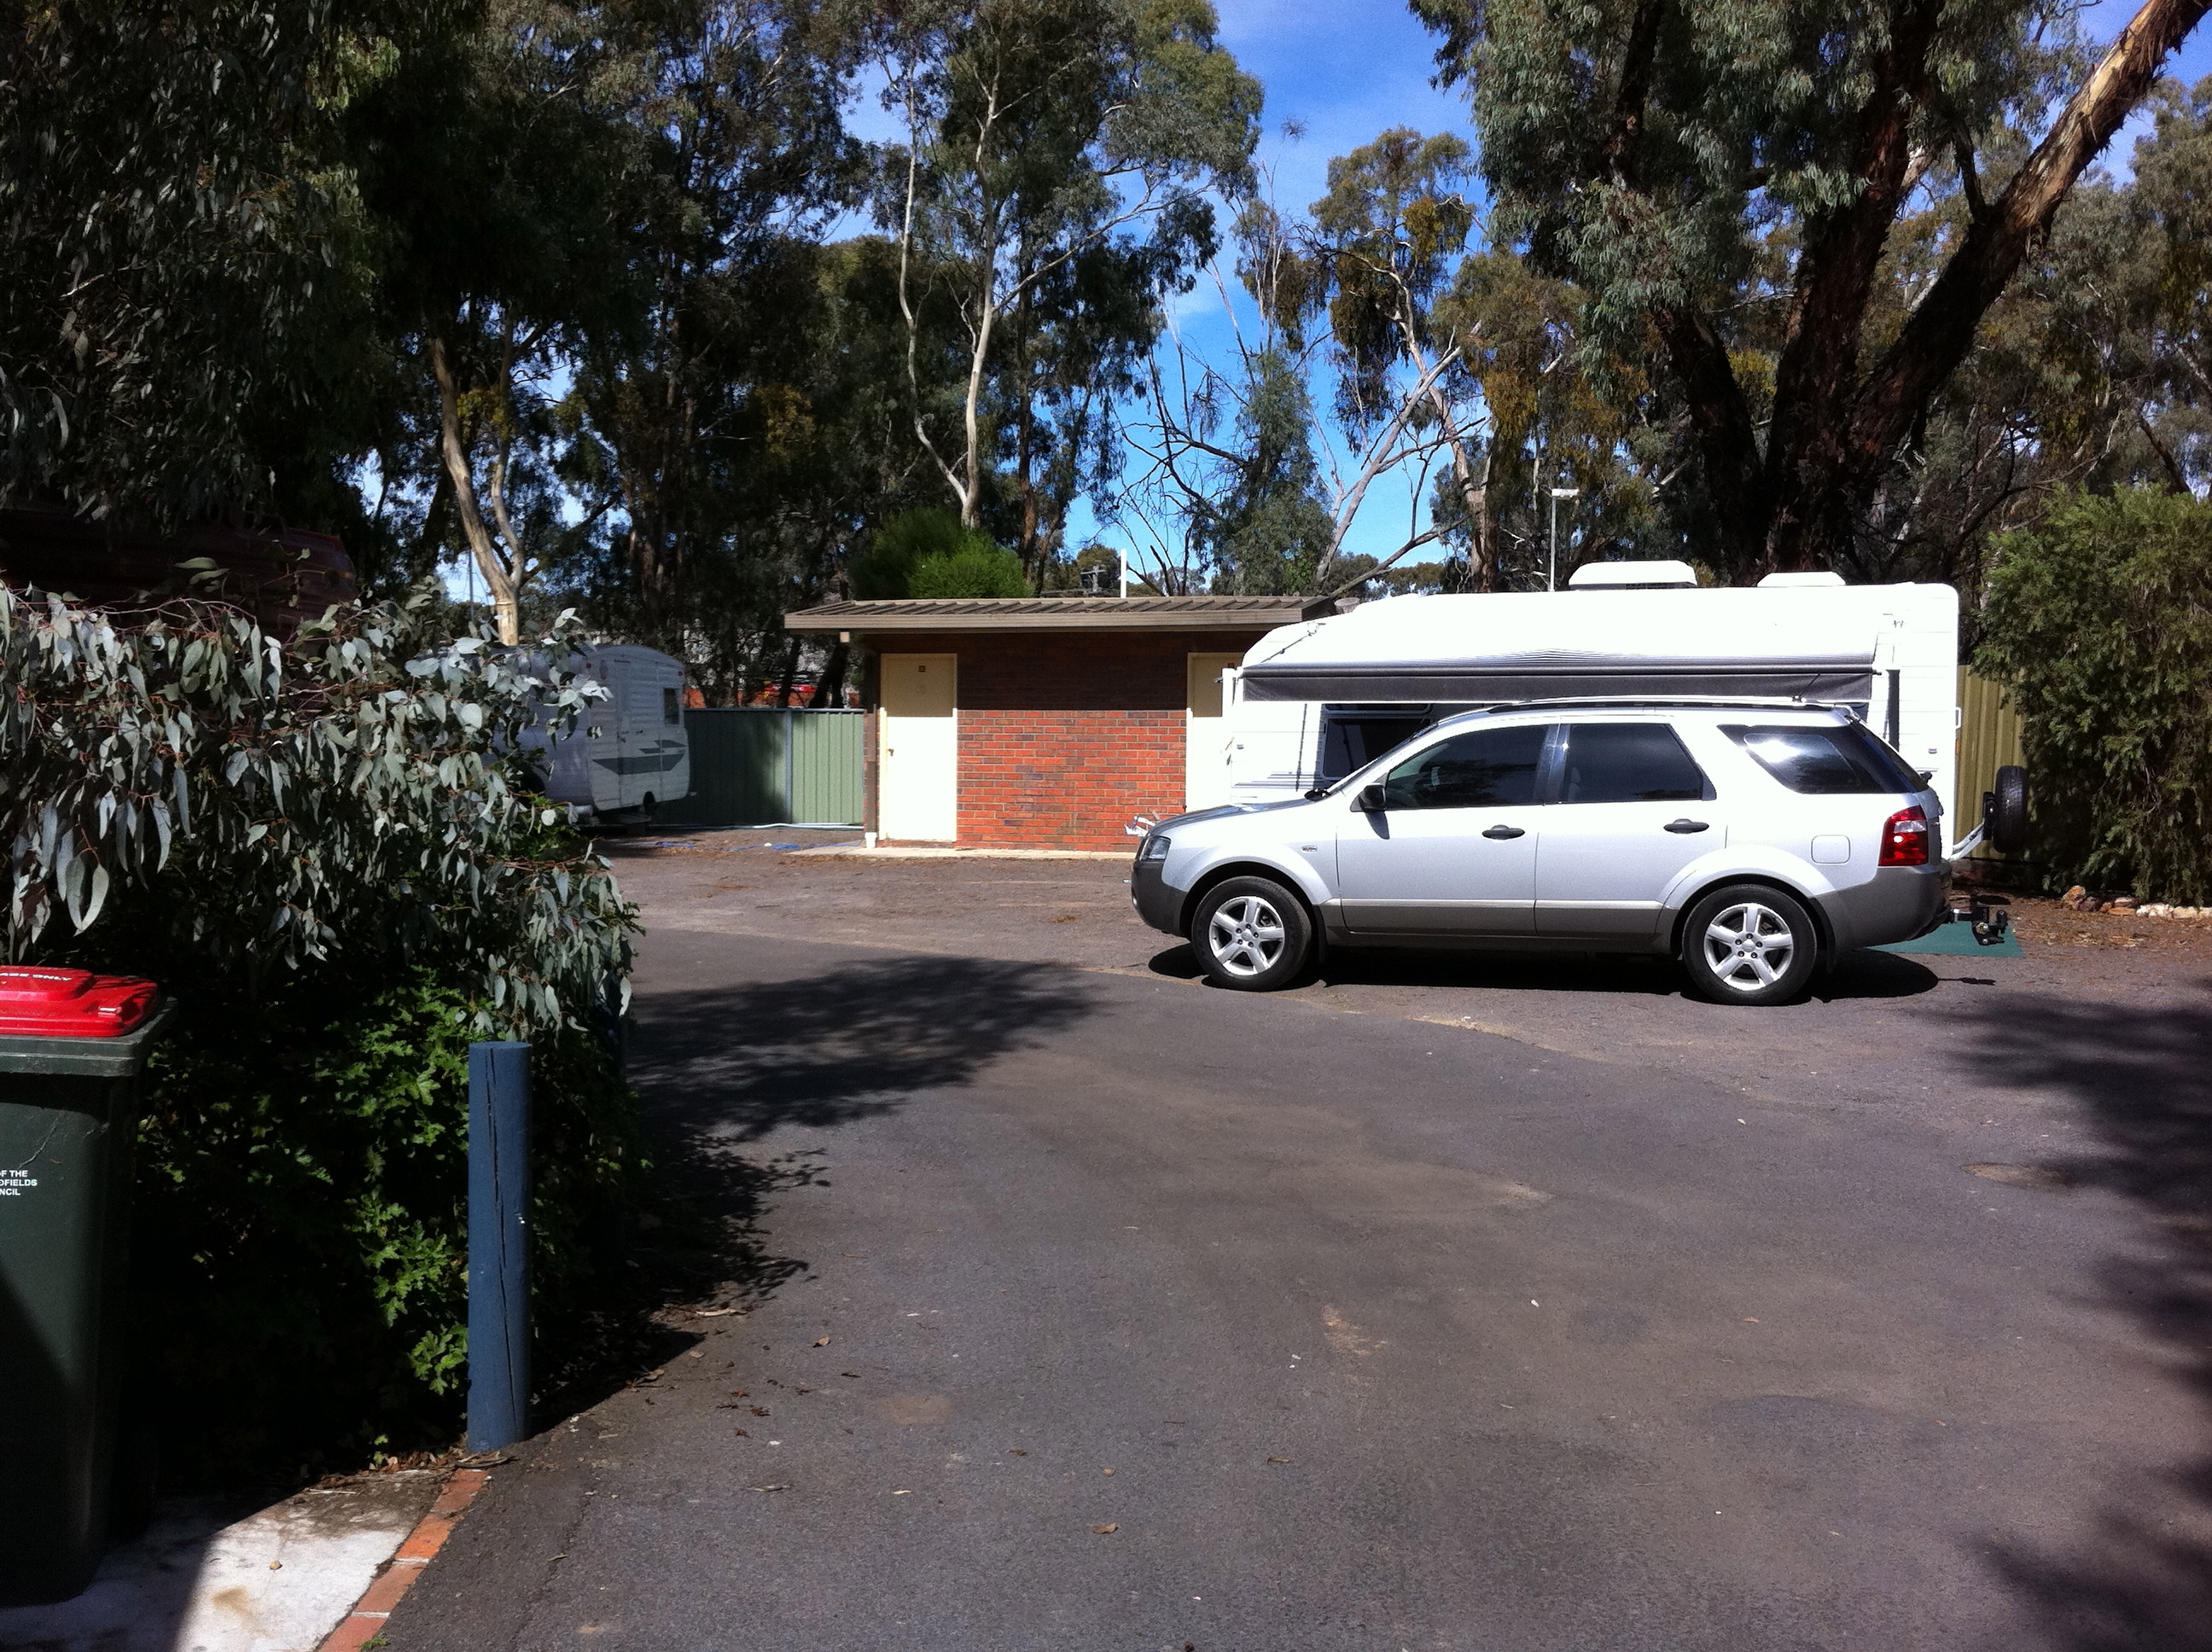 Golden Country Motel and Caravan Park - Maryborough: Powered sites for caravans